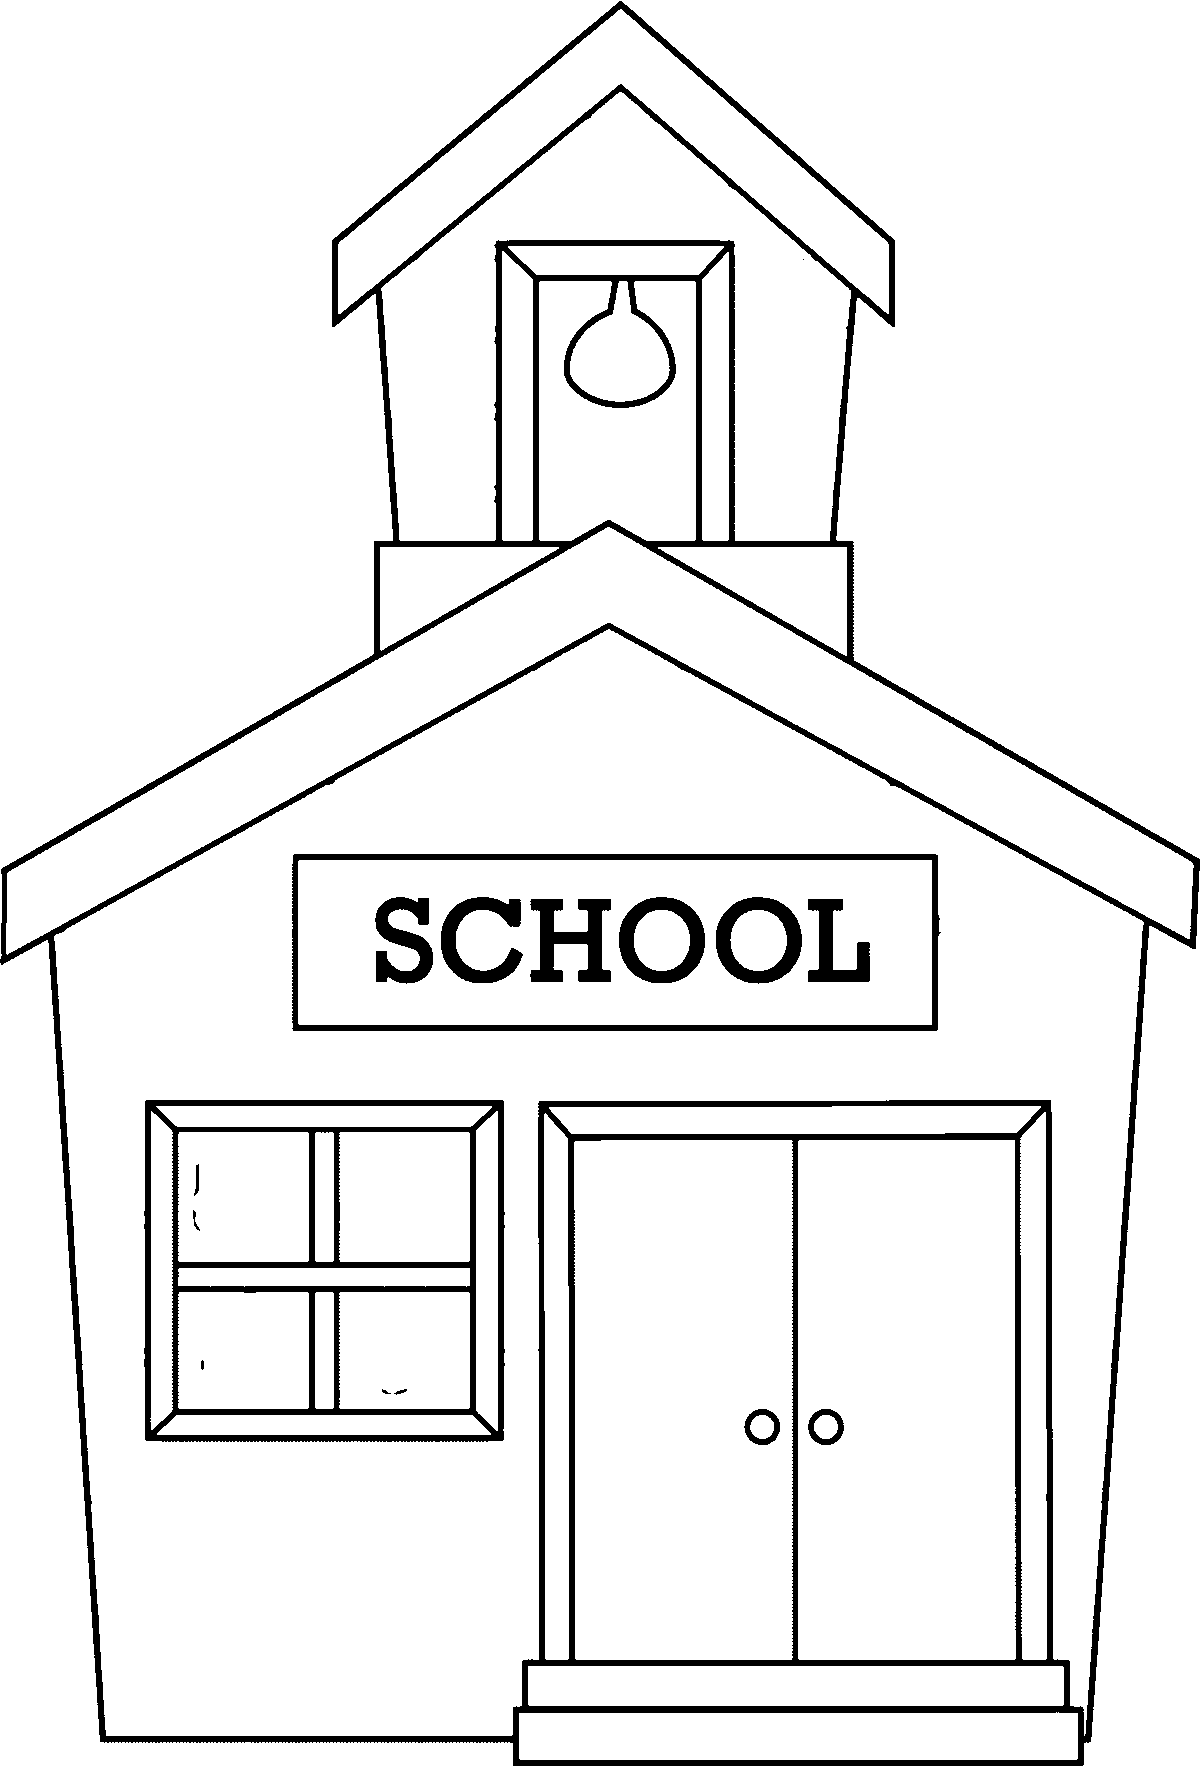 School Building Coloring Pages | Wecoloringpage